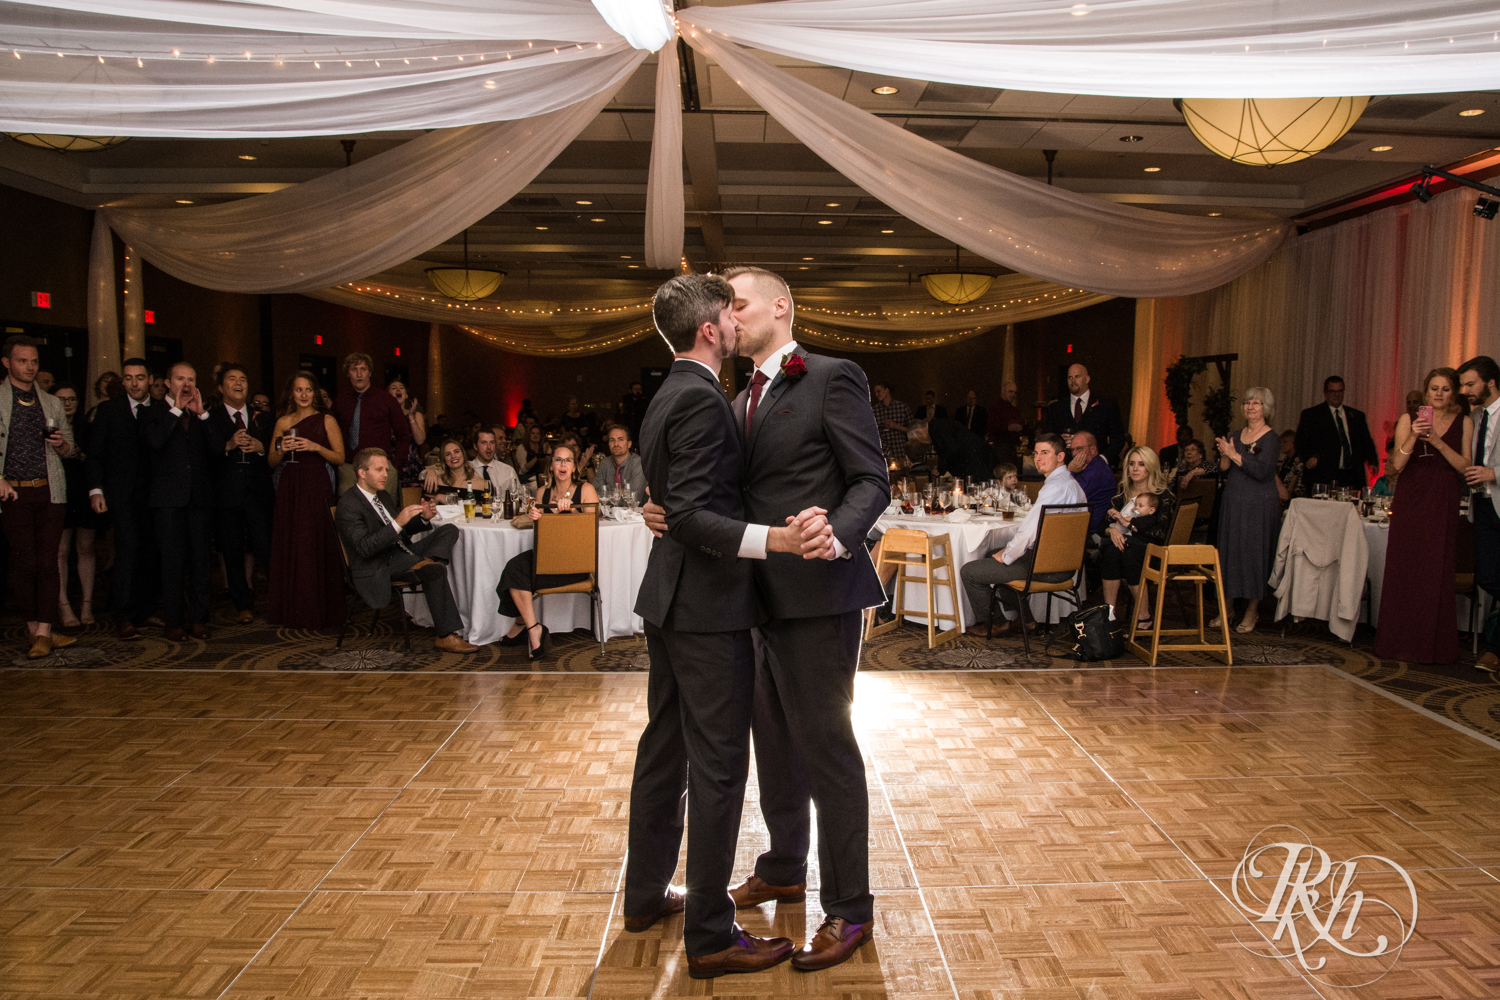 Groom share first dance at wedding reception at at Courtyard by Marriott Minneapolis.